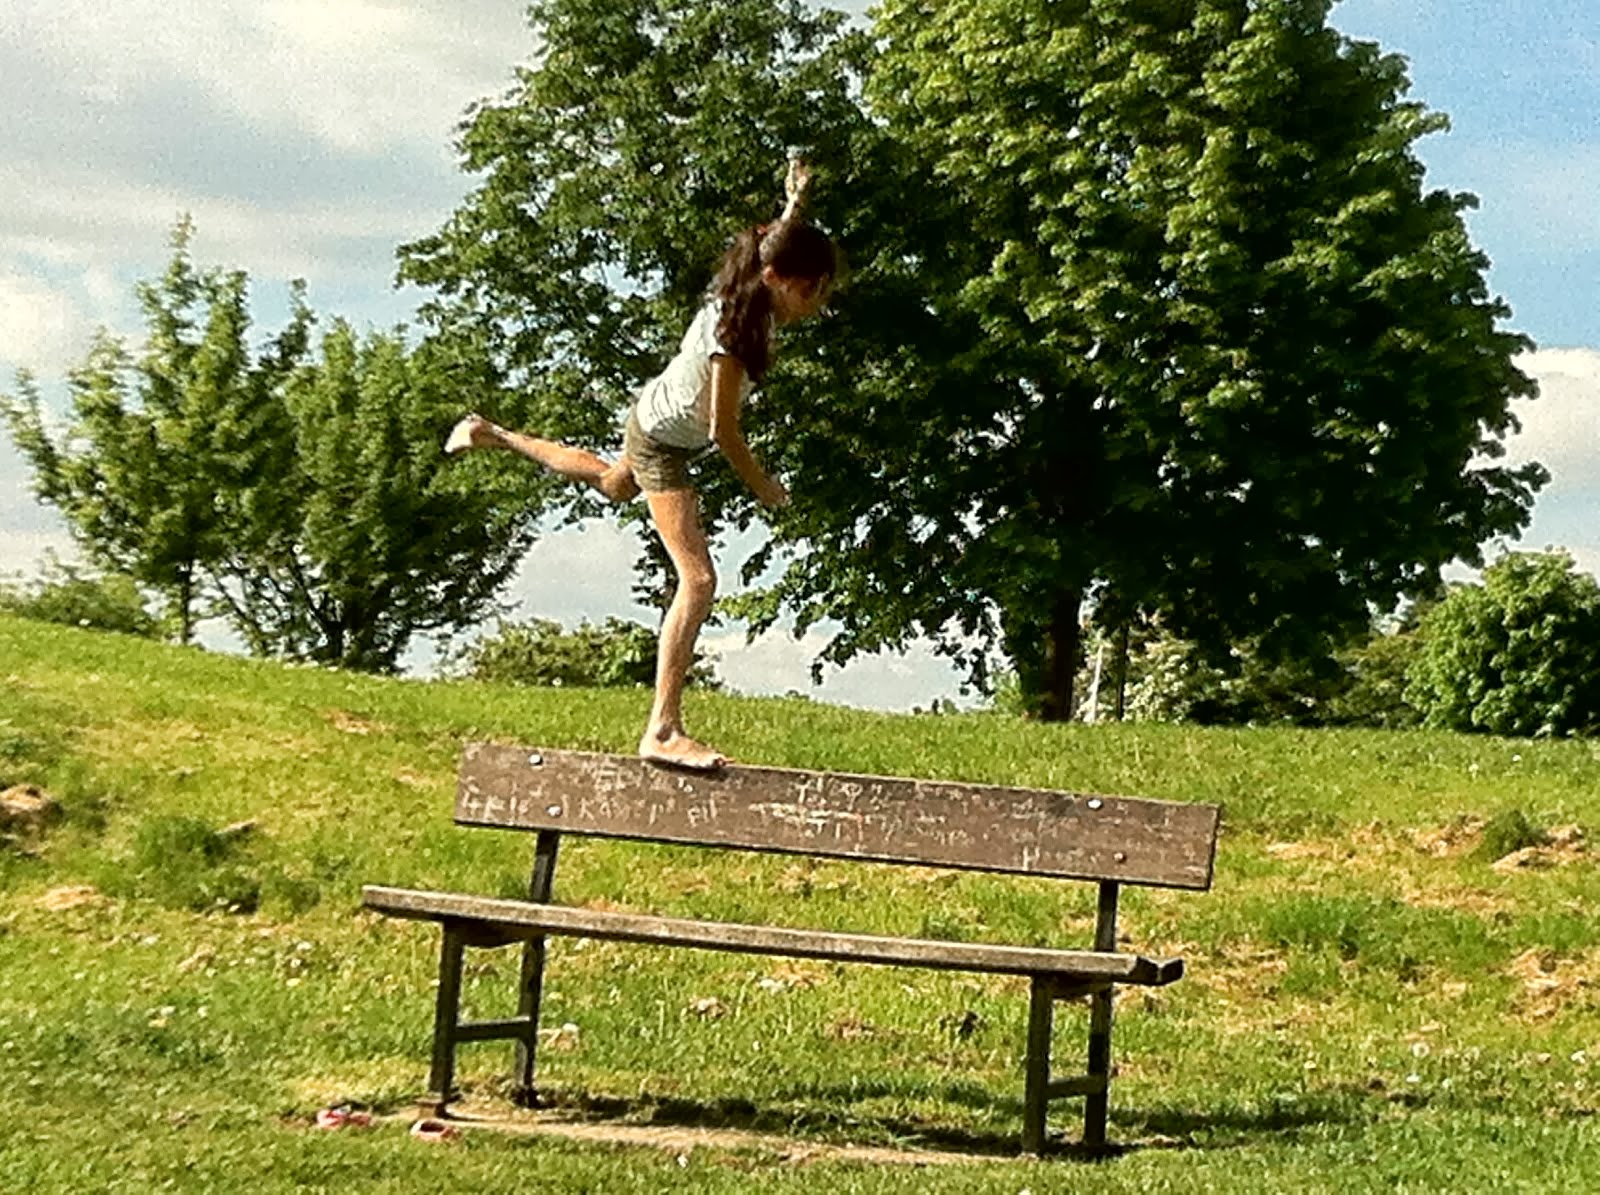 Me, one bench and my ballet.